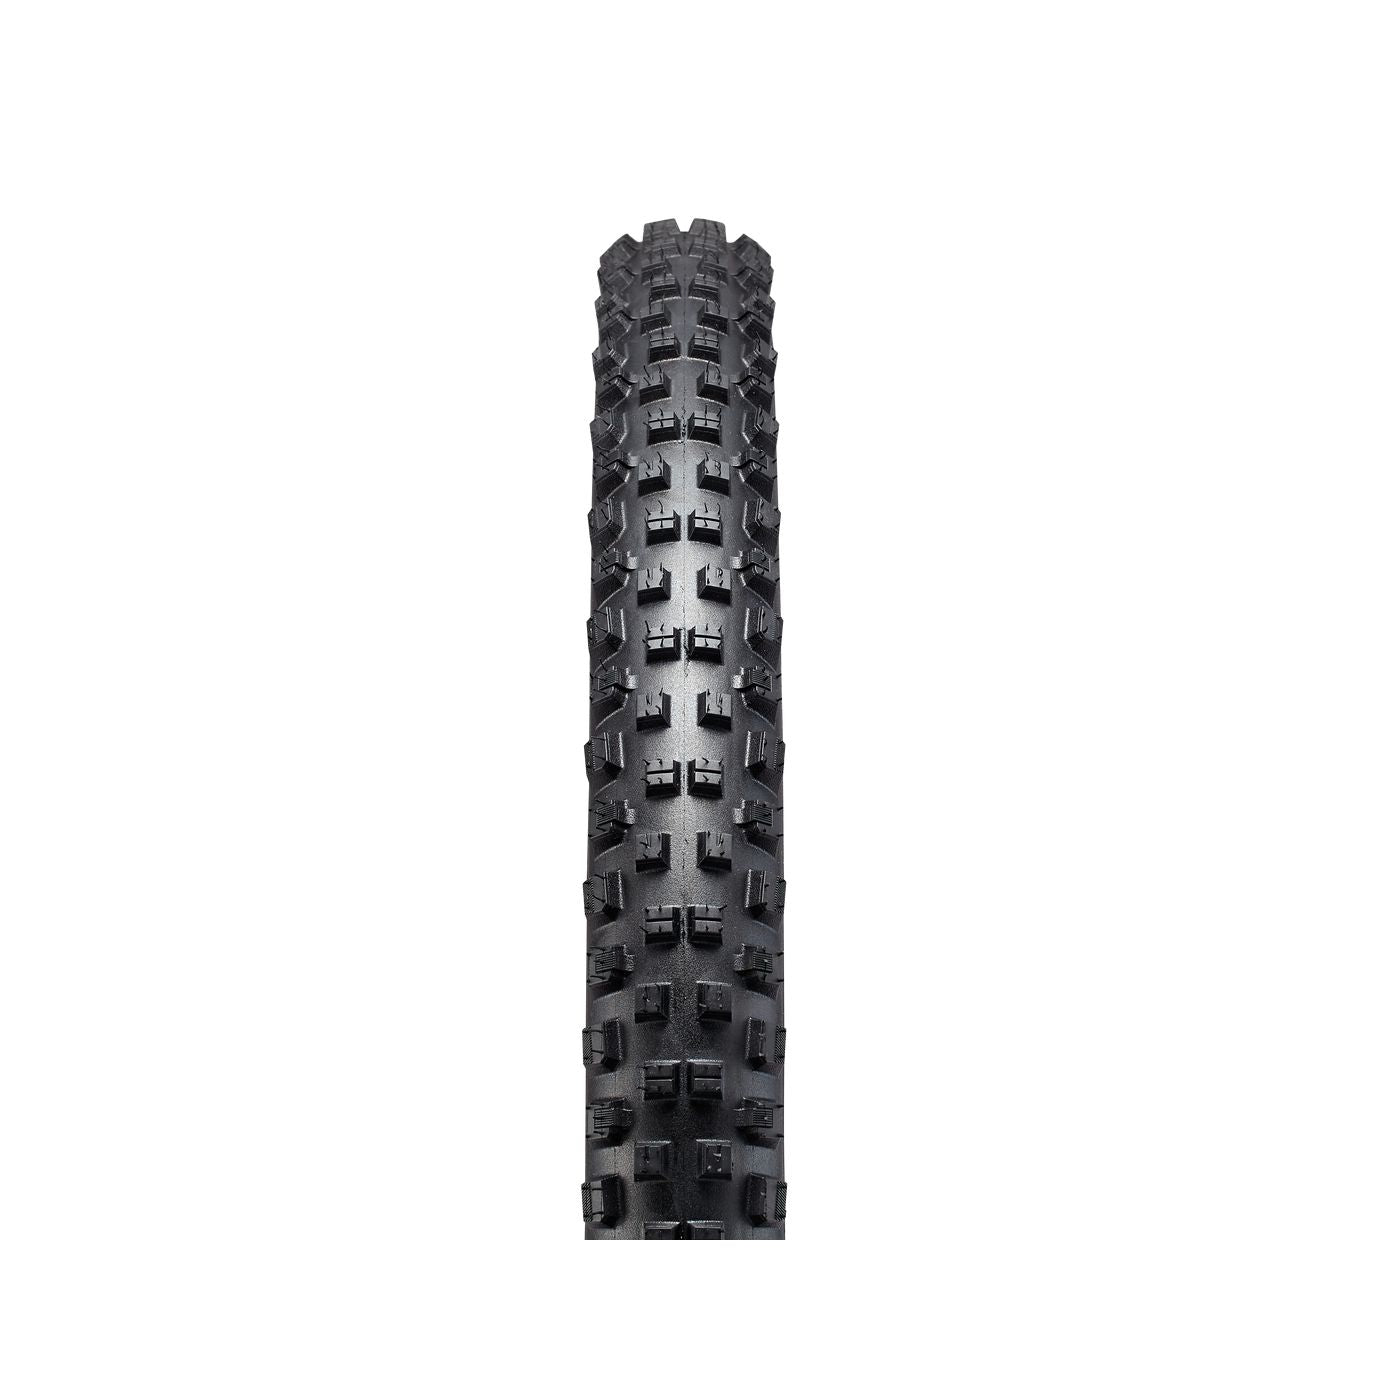 Specialized Hillbilly Grid Gravity 2Bliss Ready T9 29" Bike Tire - Tires - Bicycle Warehouse